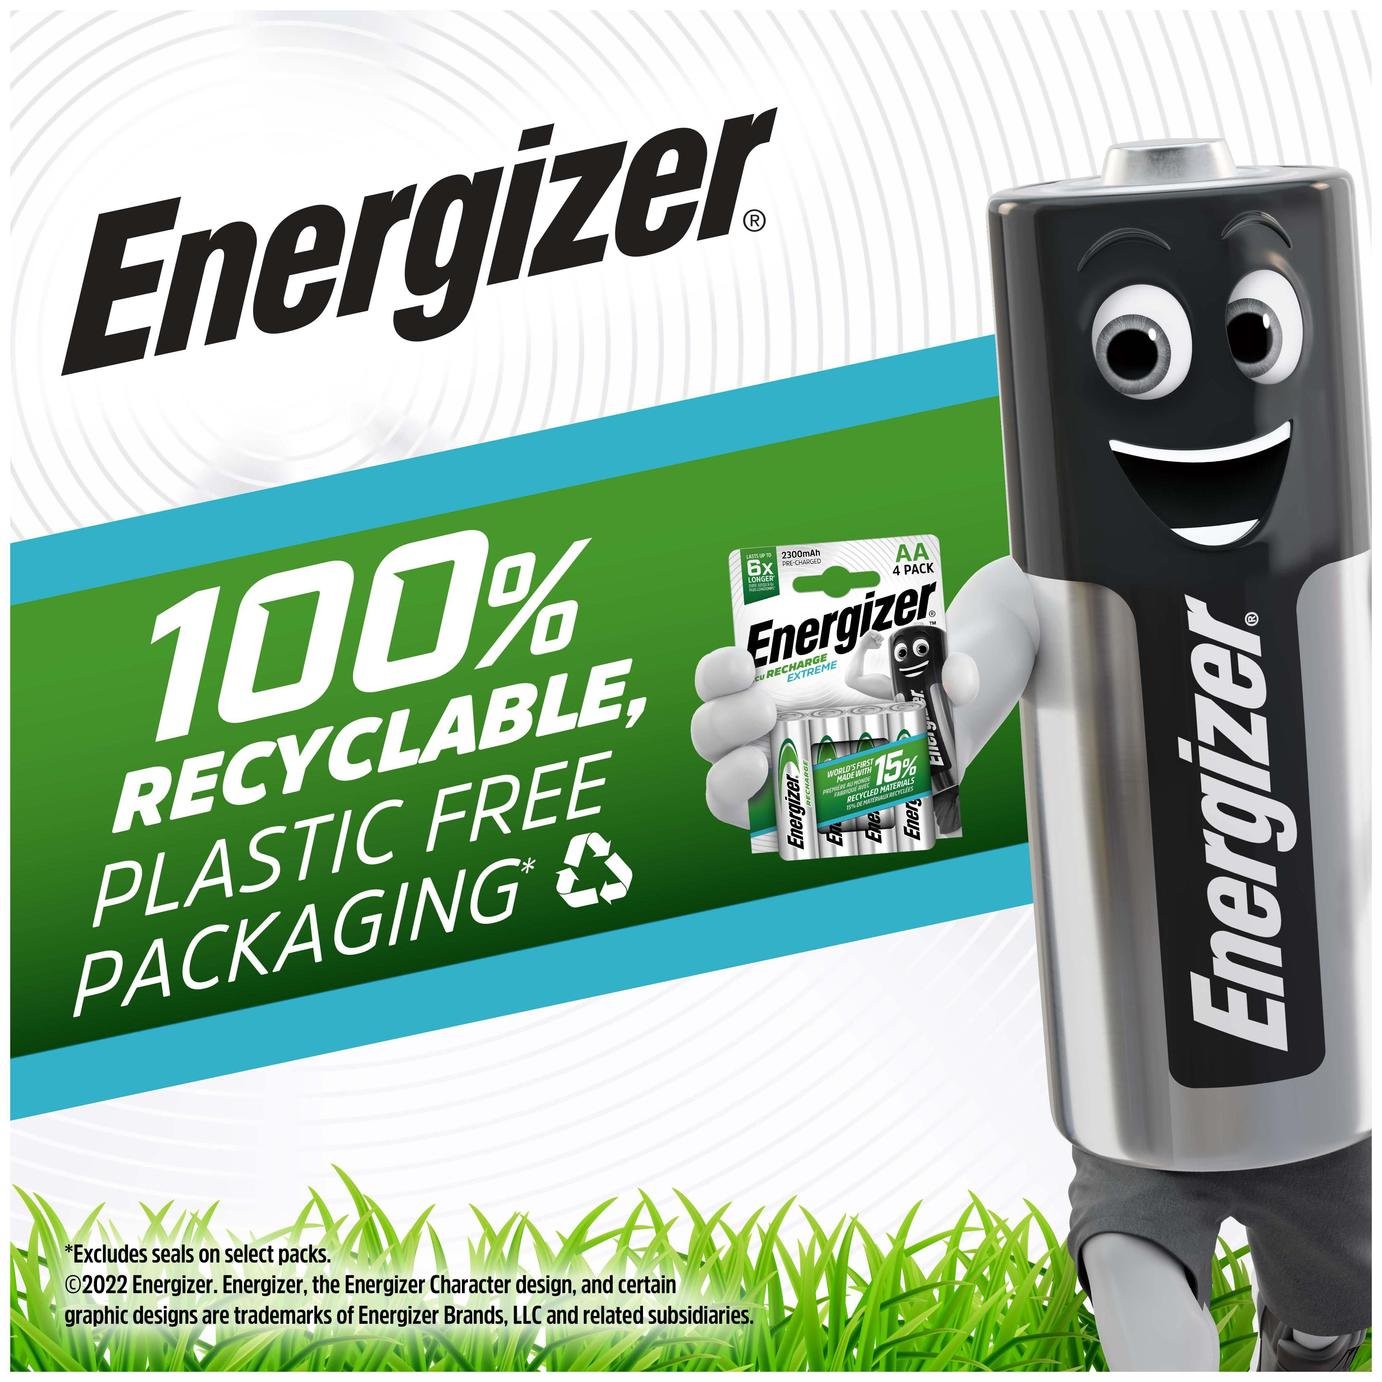 Energizer Extreme AA Rechargeable Batteries Pack of 4 Review